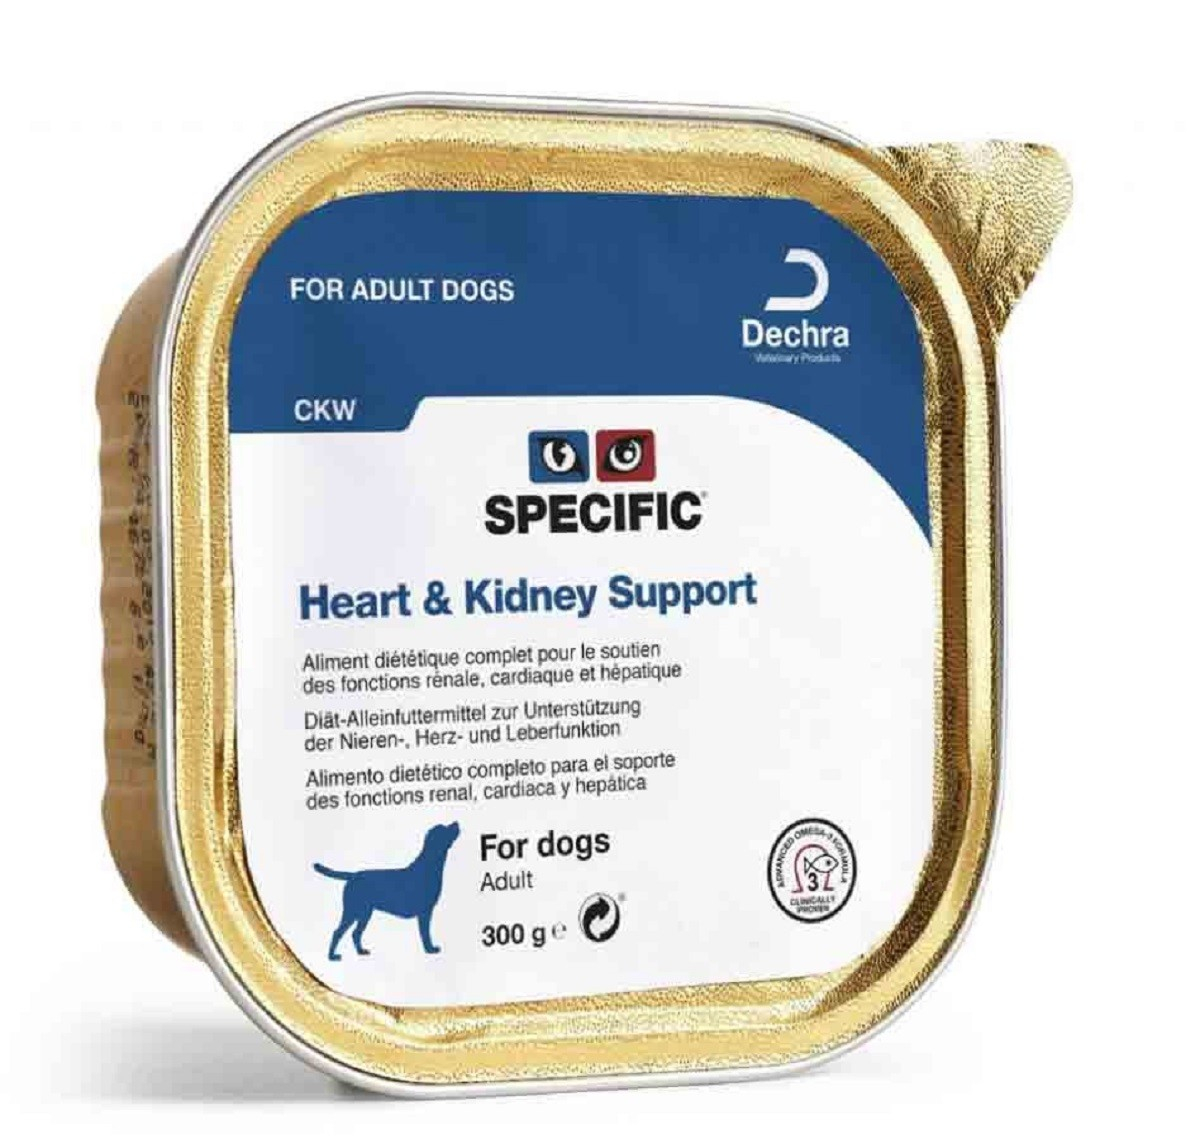 SPECIFIC CKW Pack de 6 Patés Heart & Kidney Support 300g para Perro Adulto